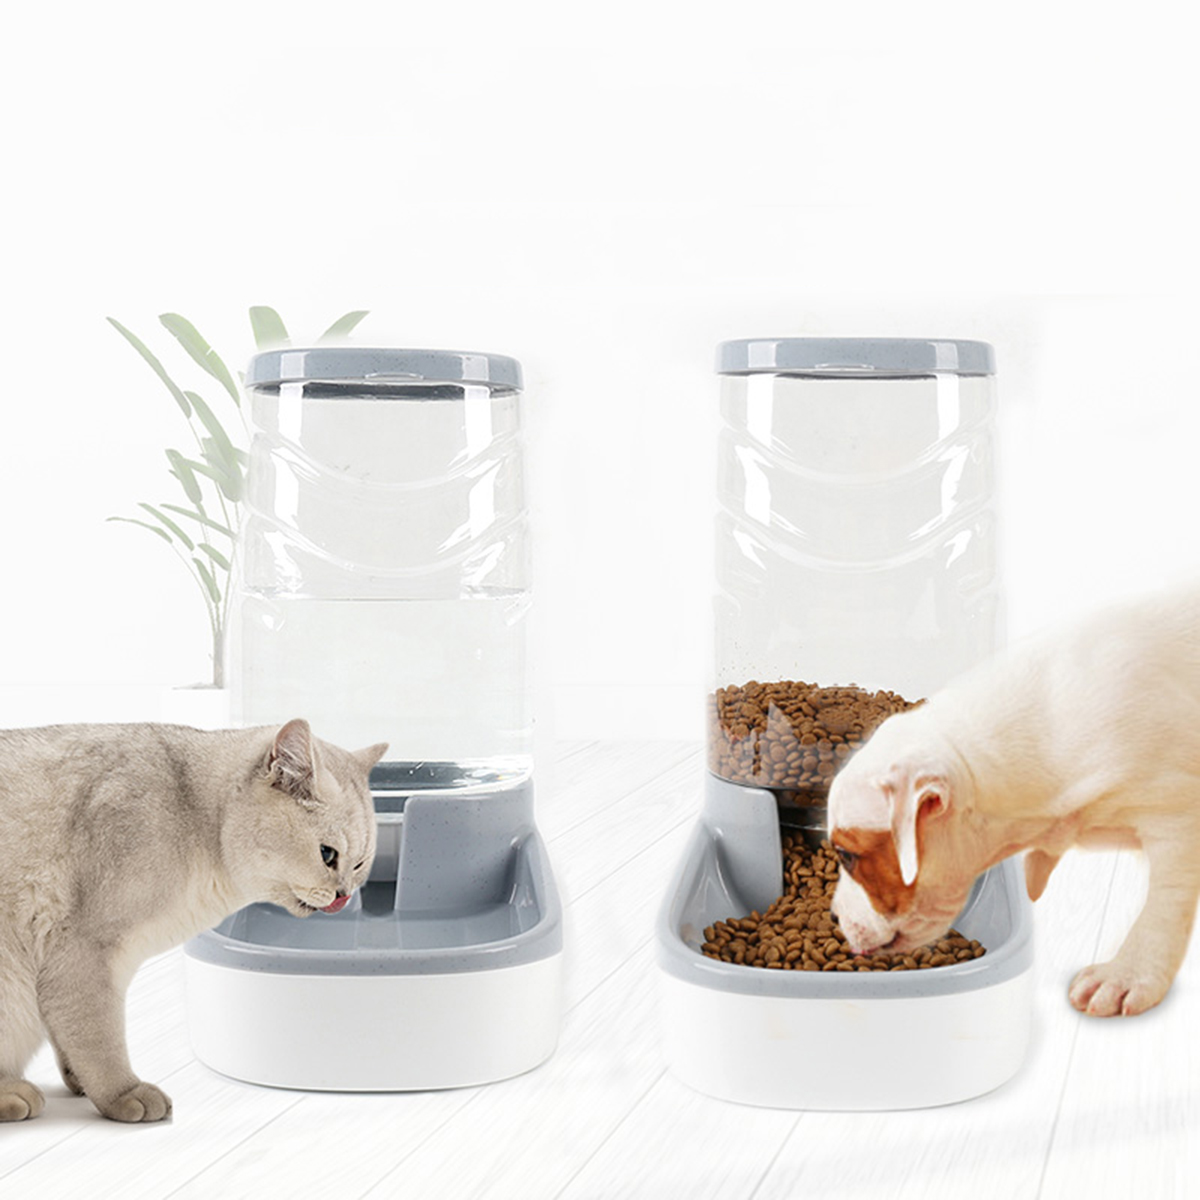 38L-Large-Automatic-Pet-Food-Drink-Dispenser-Dog-Cat-Feeder-Water-Bowl-Dish-Pets-Automatic-Waterer-F-1578383-5